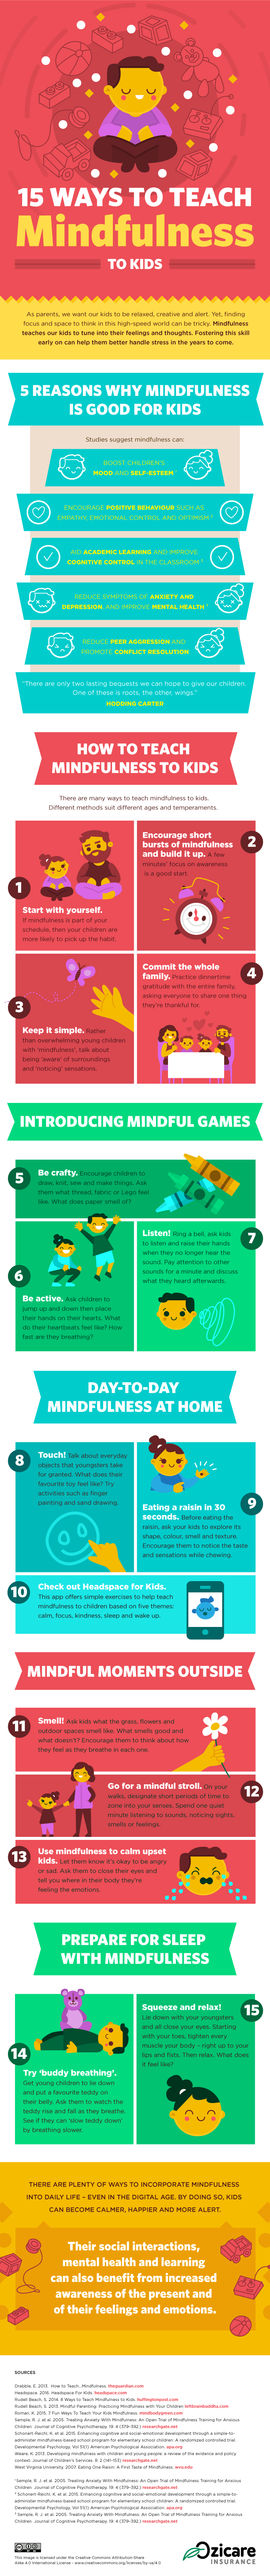 15 Ways to Teach Mindfulness to Kids [Infographic]